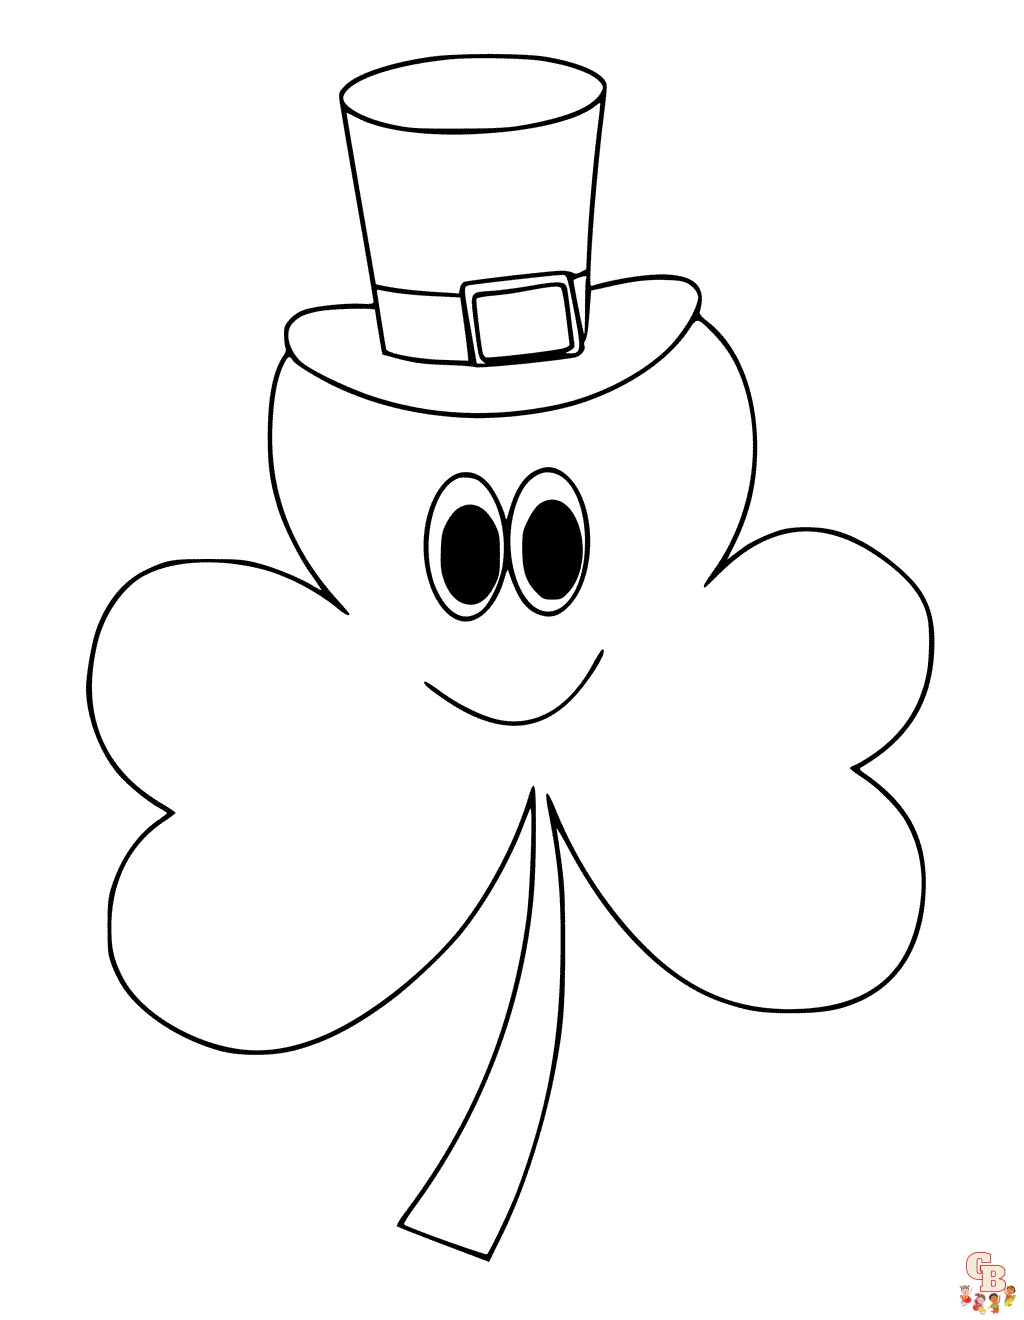 Shamrock coloring pages free printable and easy to color